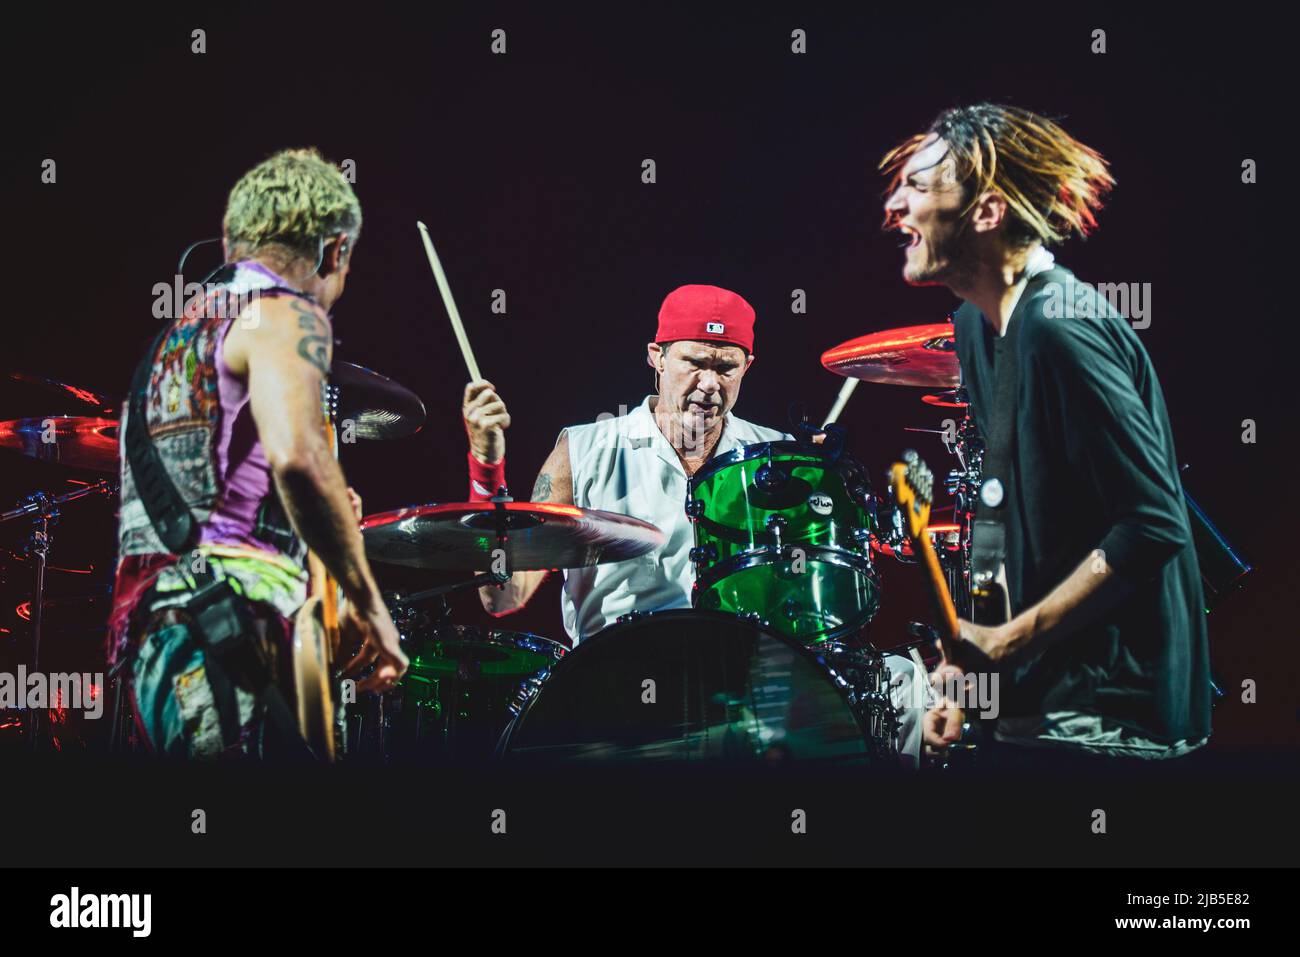 ZURICH, HALLENSTADION, OCTOBER 5TH 2016: Flea (L), Chad Smith (C) and Josh Klinghoffer (R), members of the American funk rock band Red Hot Chili Peppers, performing live on stage for the Swiss leg of the “Getaway World Tour” Stock Photo